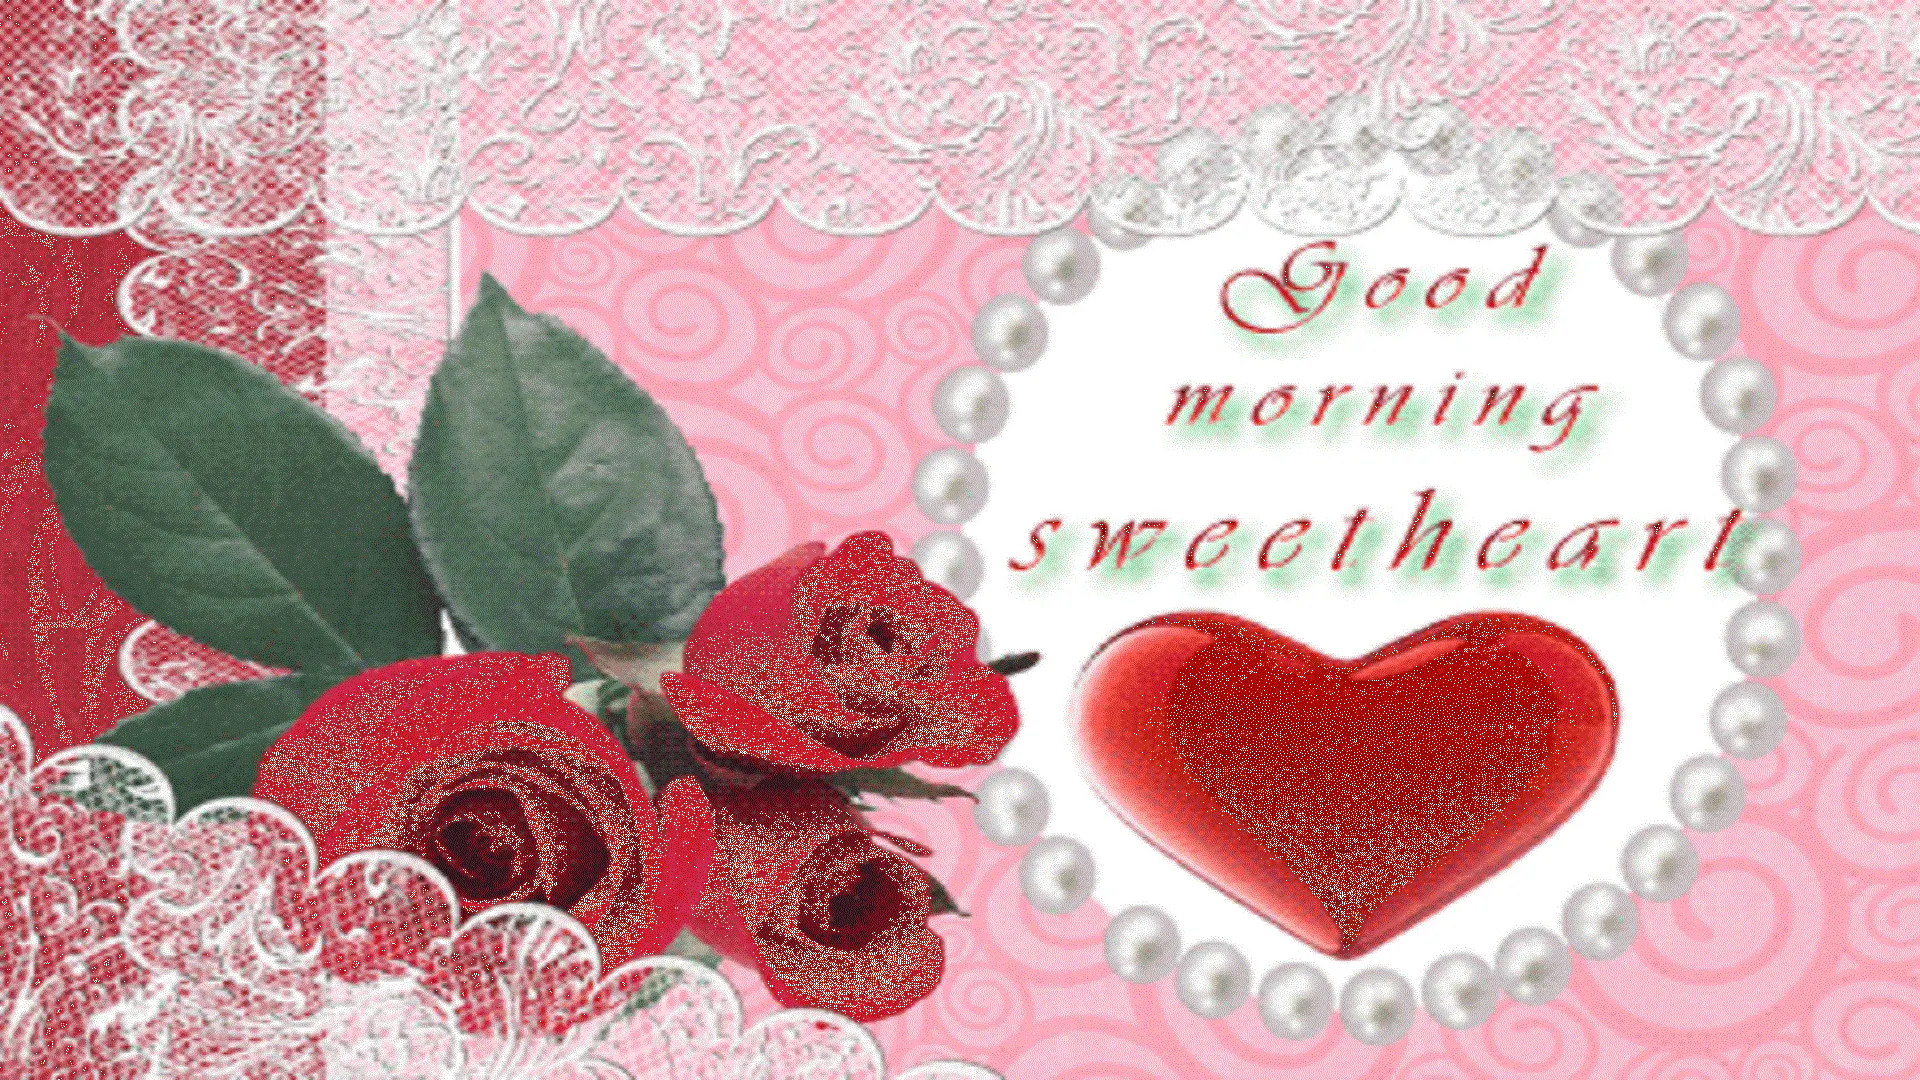 Amazing Beautiful Good Morning Wallpapers Images Hd Download Free For  Desktop 